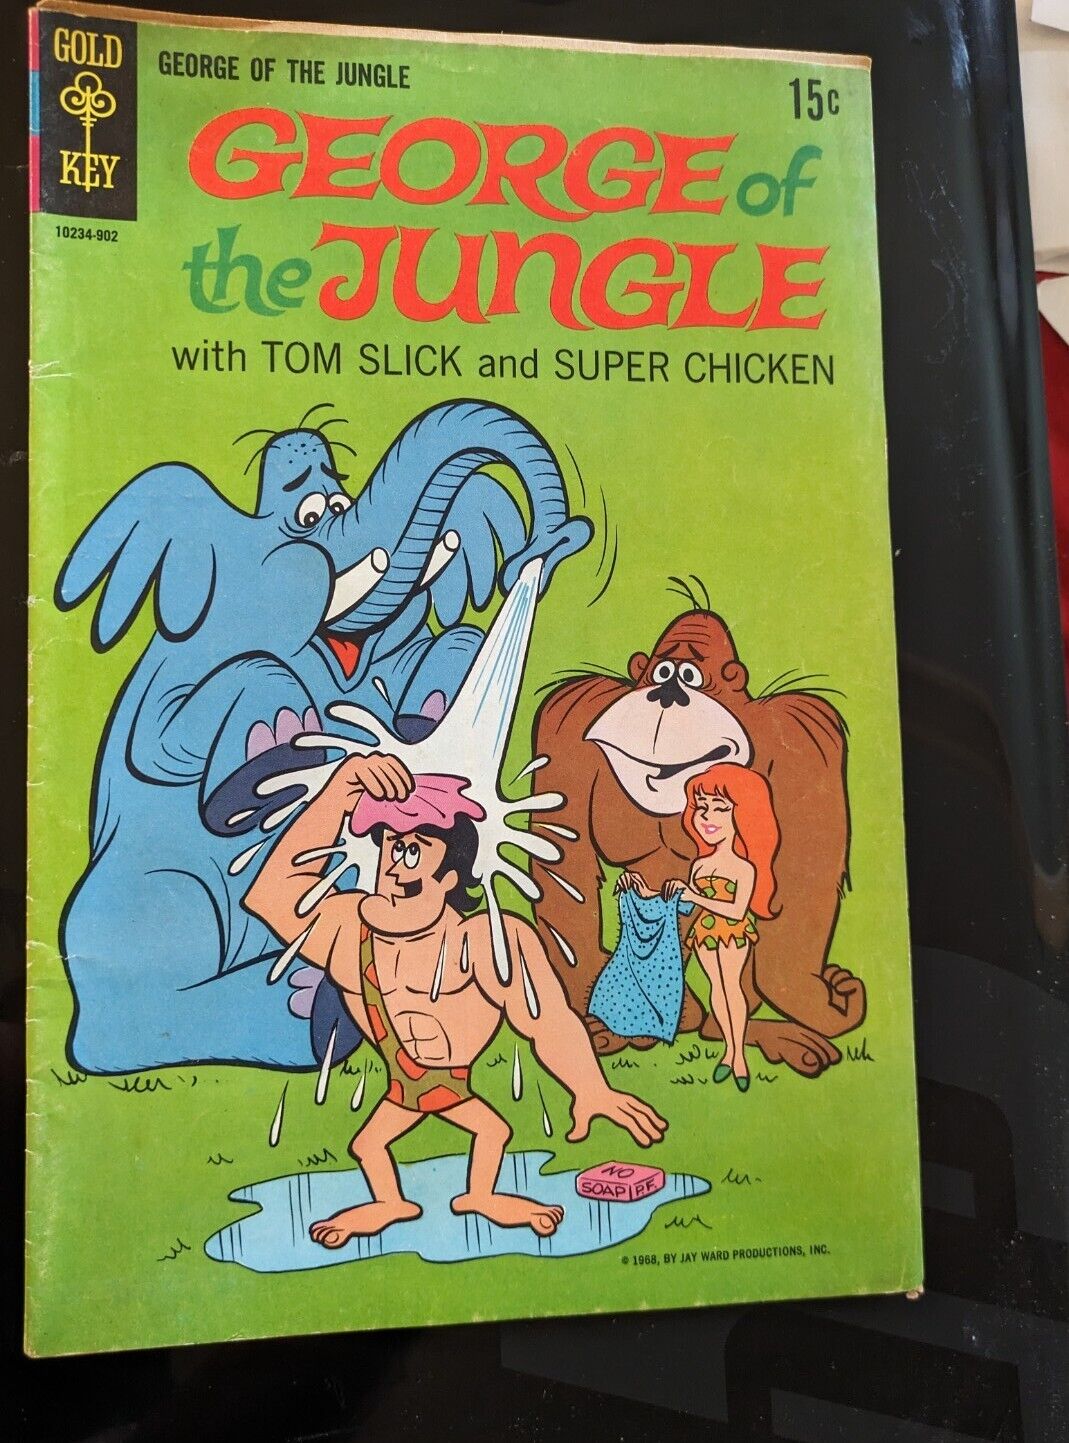 VTG 1968 1st Issue GEORGE of the JUNGLE NO. 1 GOLD KEY ORIGINAL COMIC BOOK 